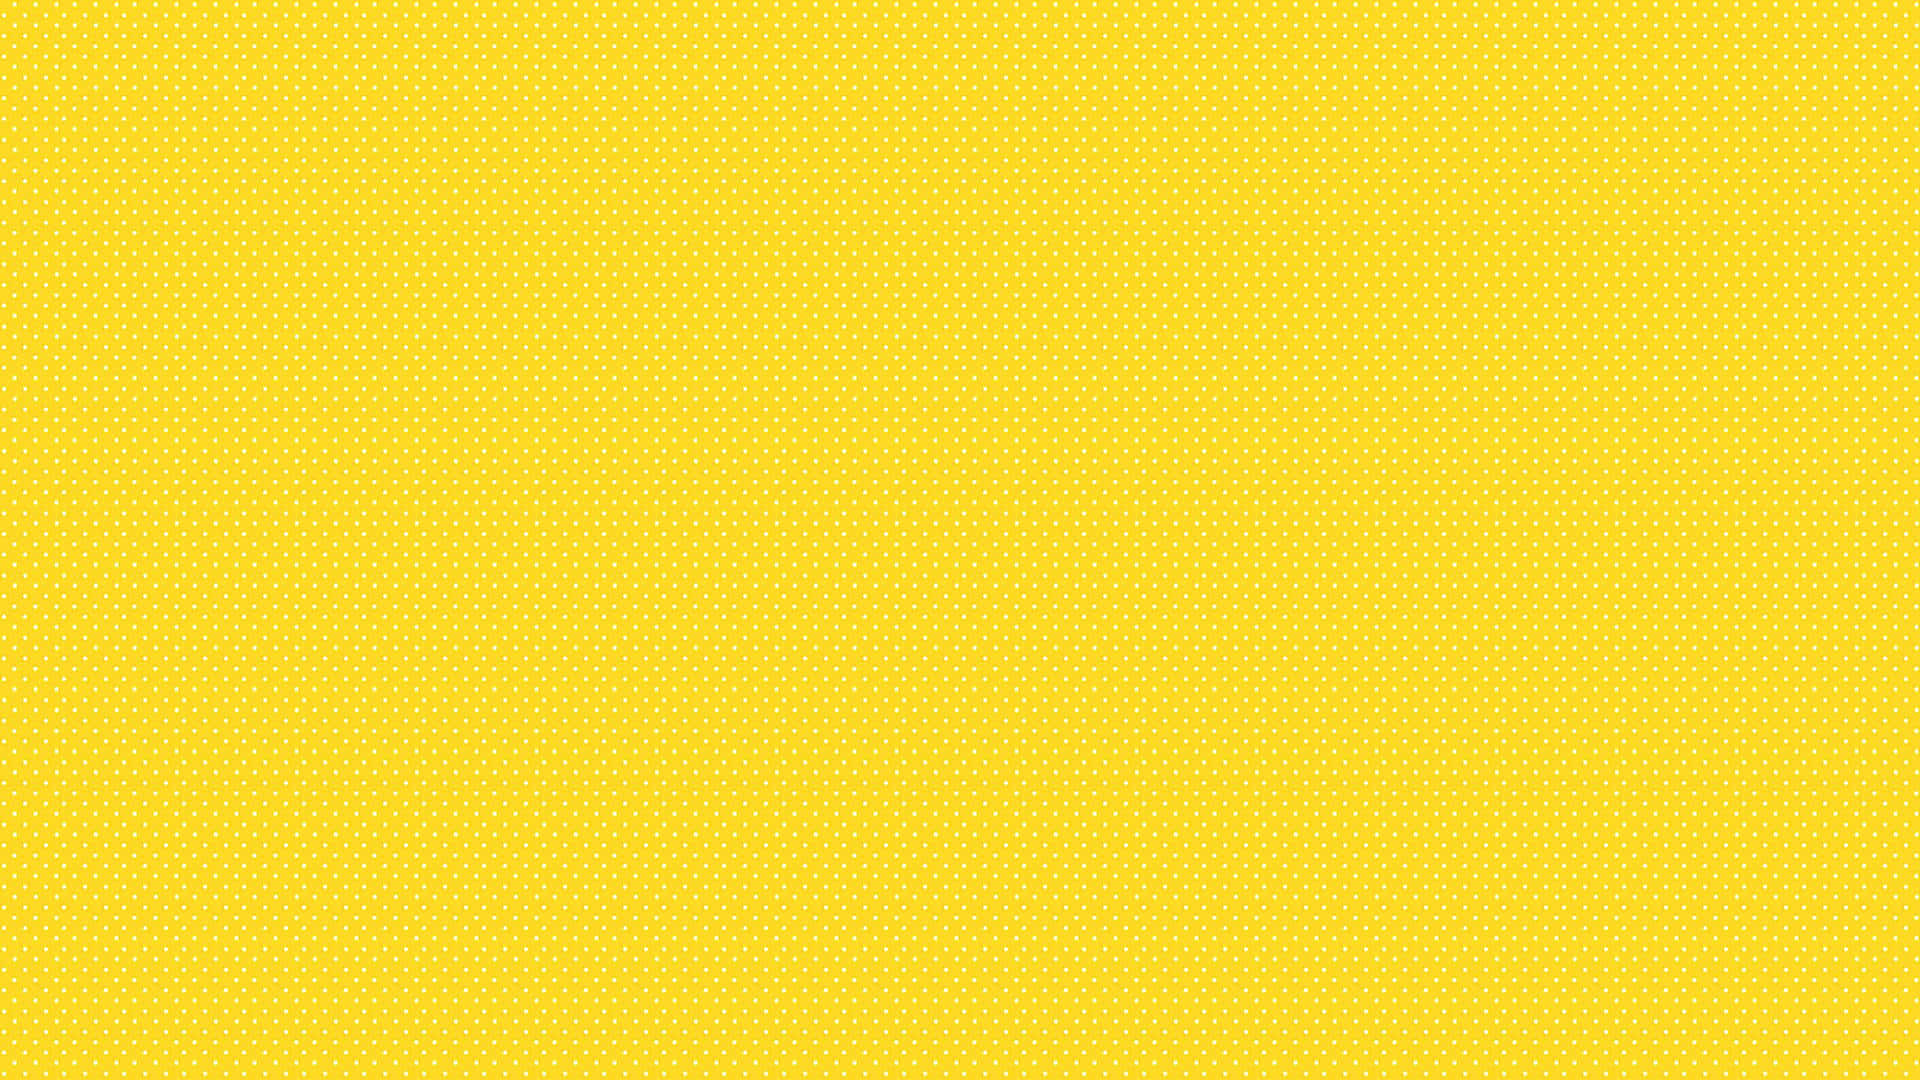 Brighten up your day with this aesthetic yellow background